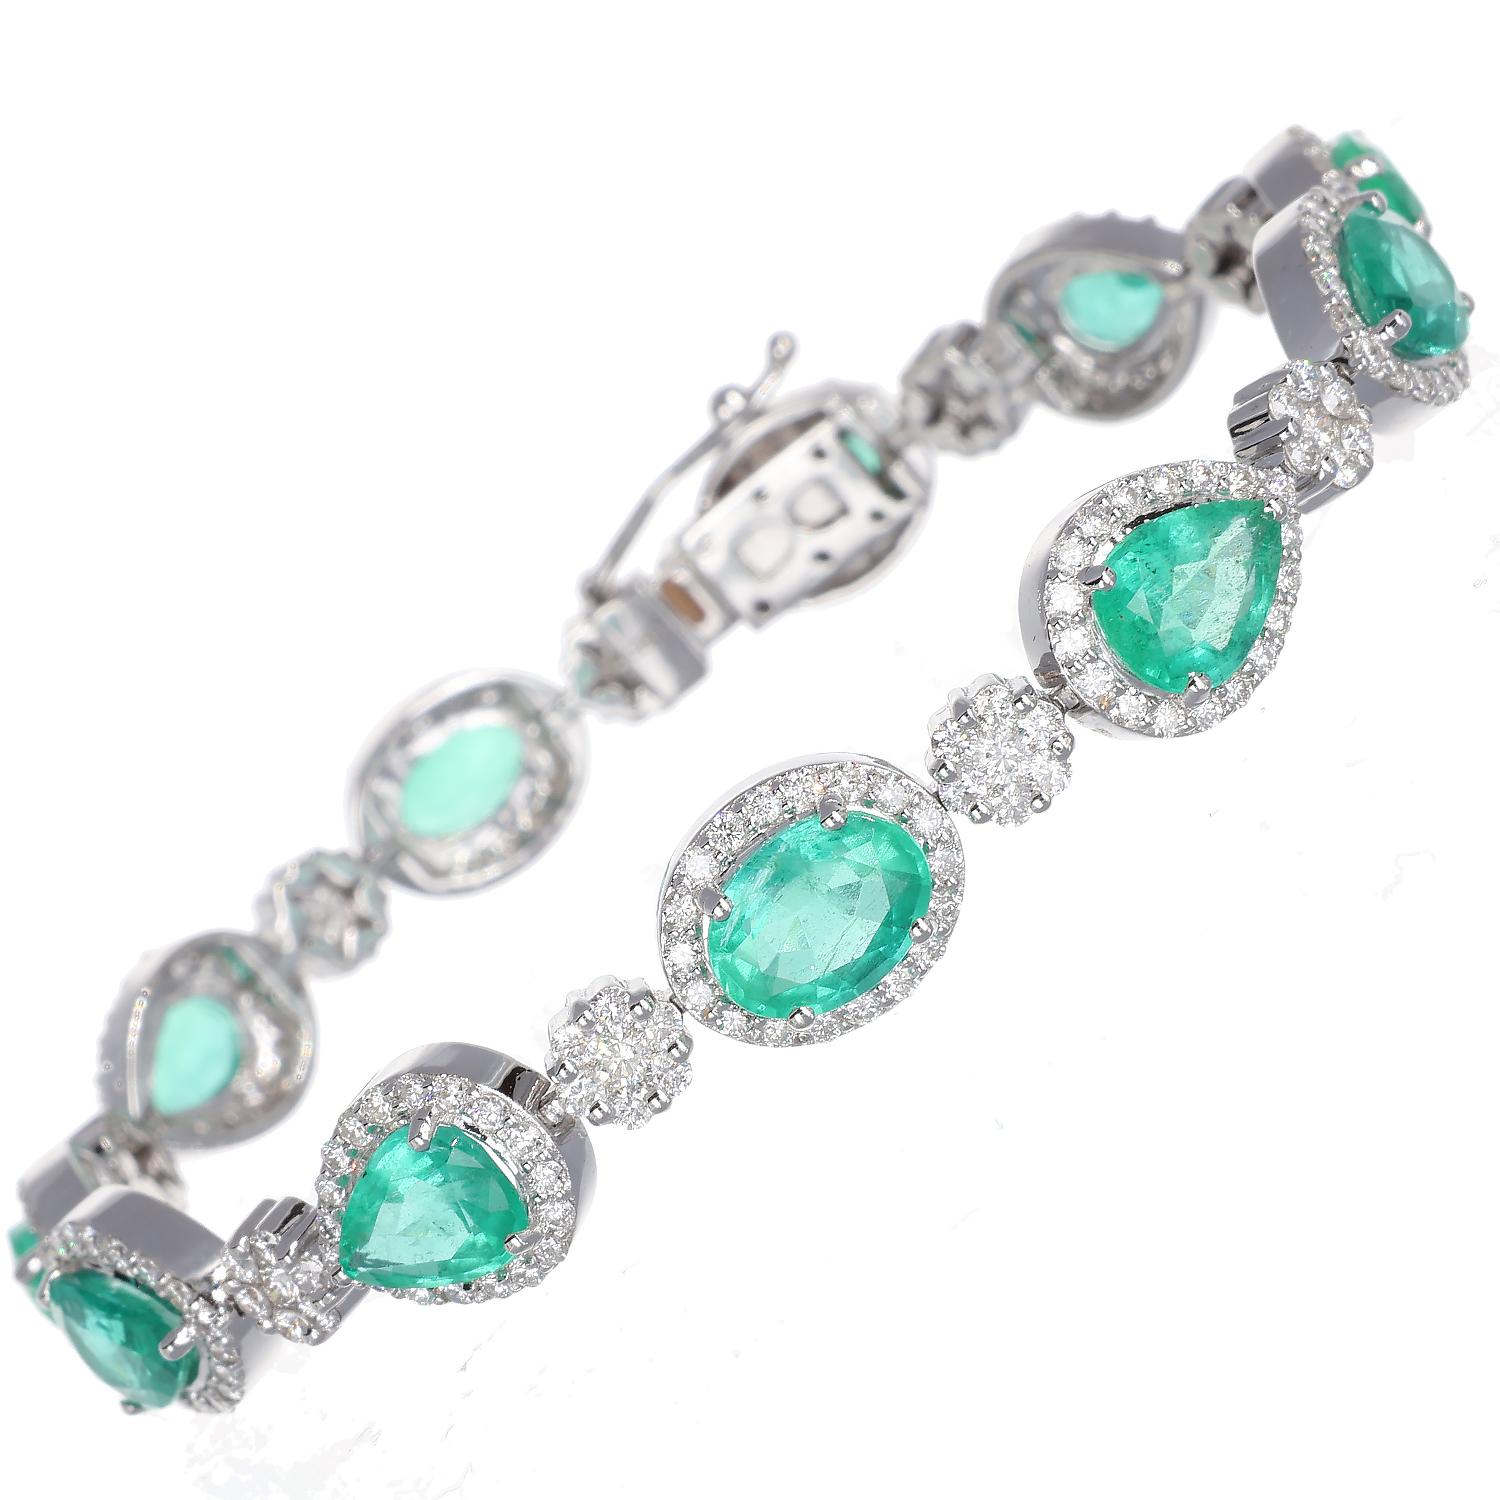 We summon the hanging gardens of a bygone era, where the essence of nature transforms every moment into eternity. This bracelet is a hymn to life, with each emerald capturing the quintessence of verdant earth and the diamonds reflecting the stars'